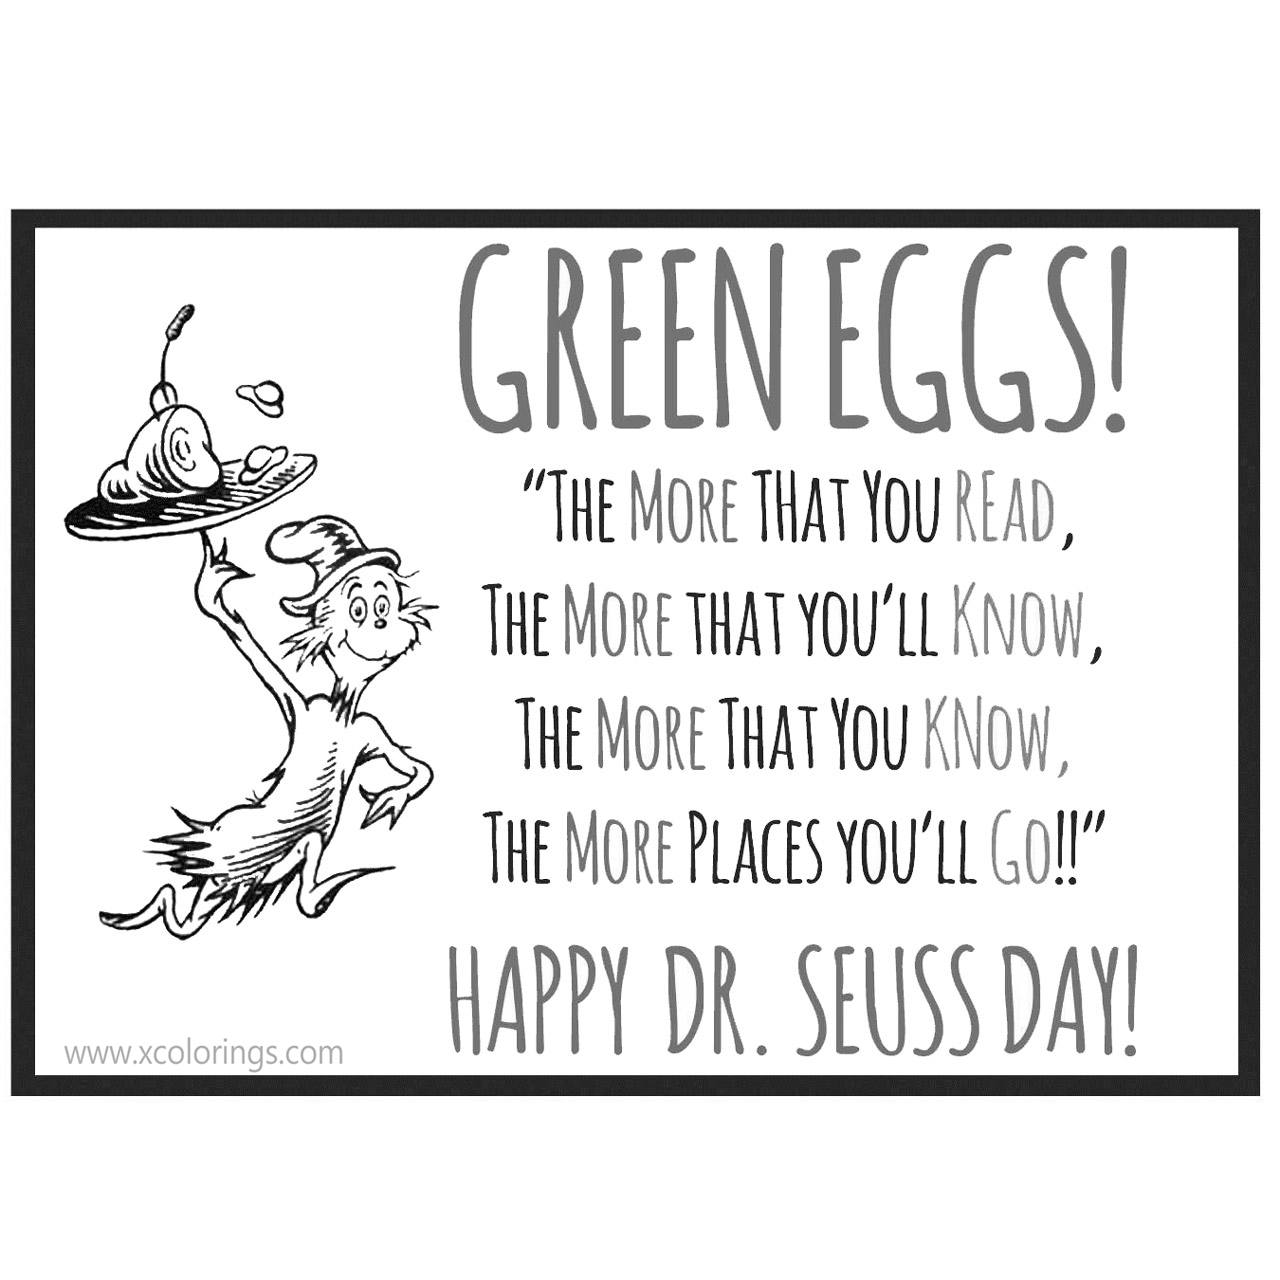 Free Happy Dr. Seuss Day Coloring Pages Green Eggs printable